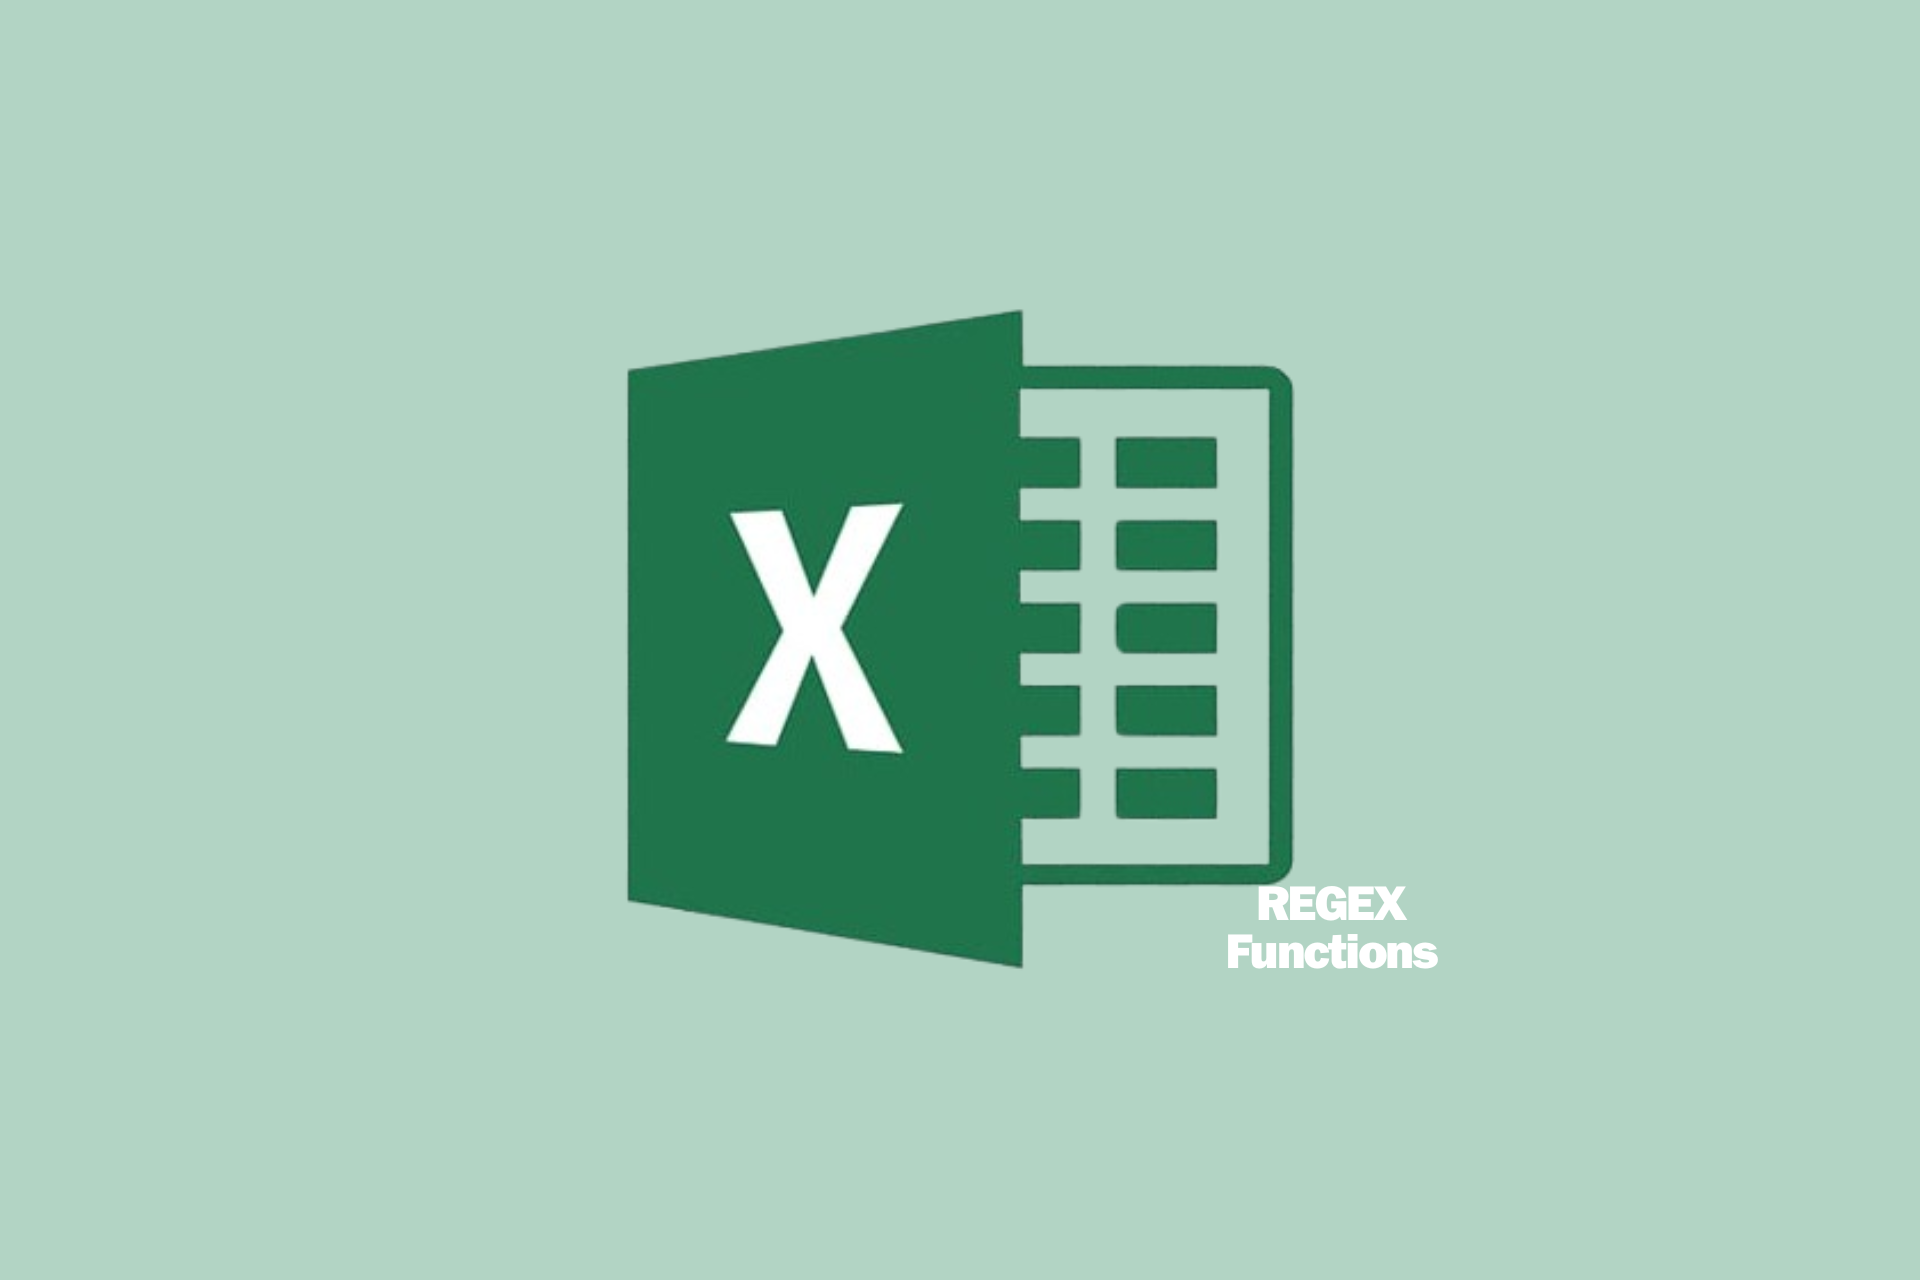 Microsoft Excel now comes with REGEX functions